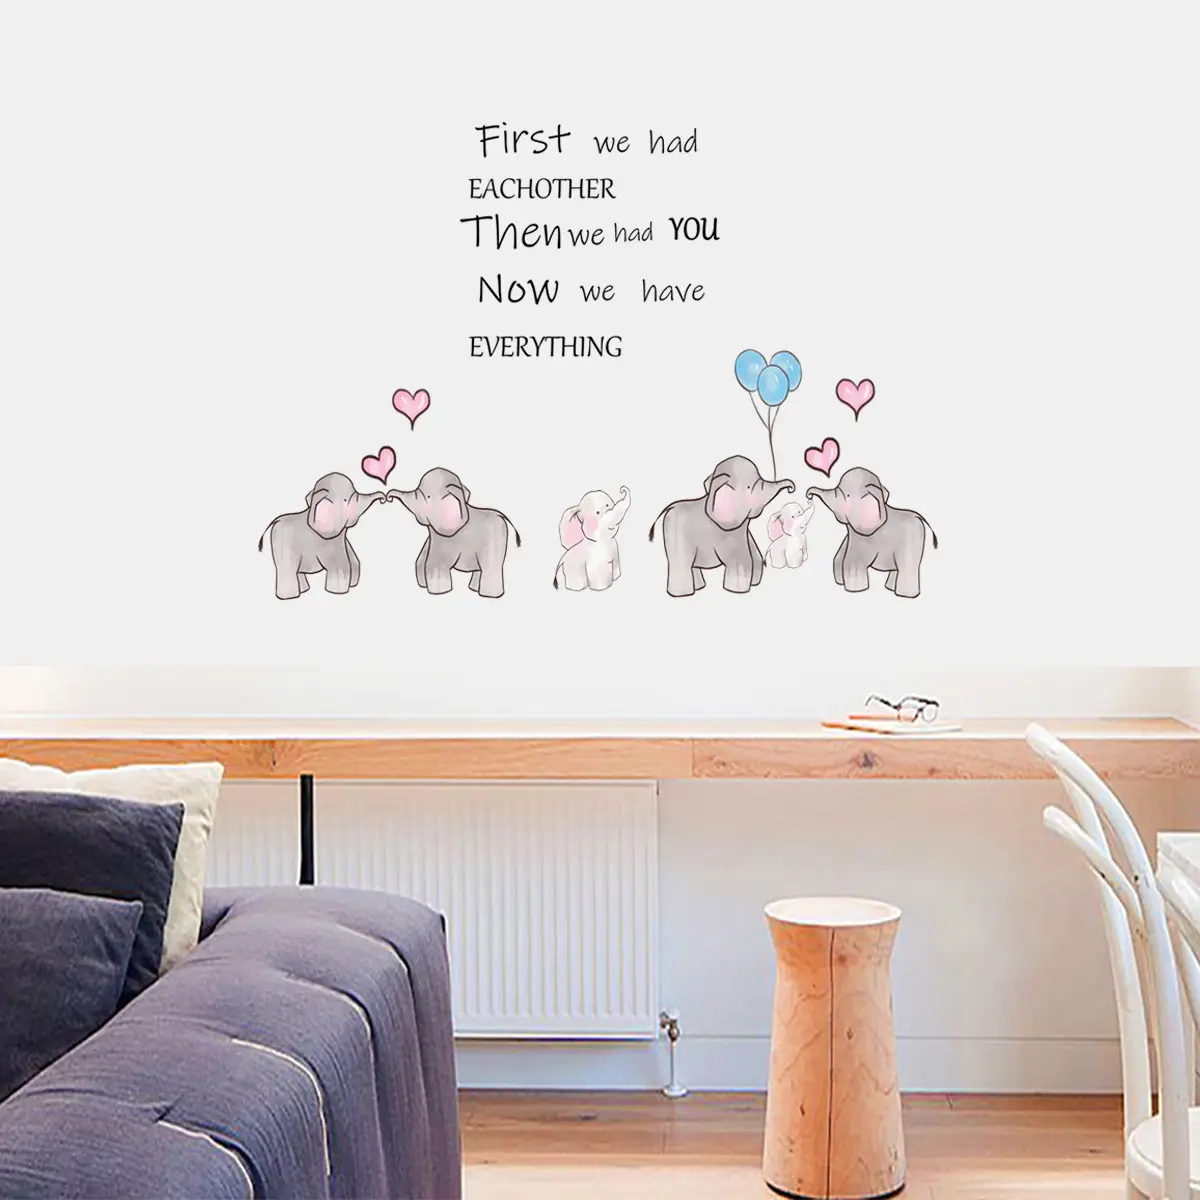 Adorable elephant cartoon wall decal with emotional words decor watercolor balloon sticker removable DIY art mural for kids